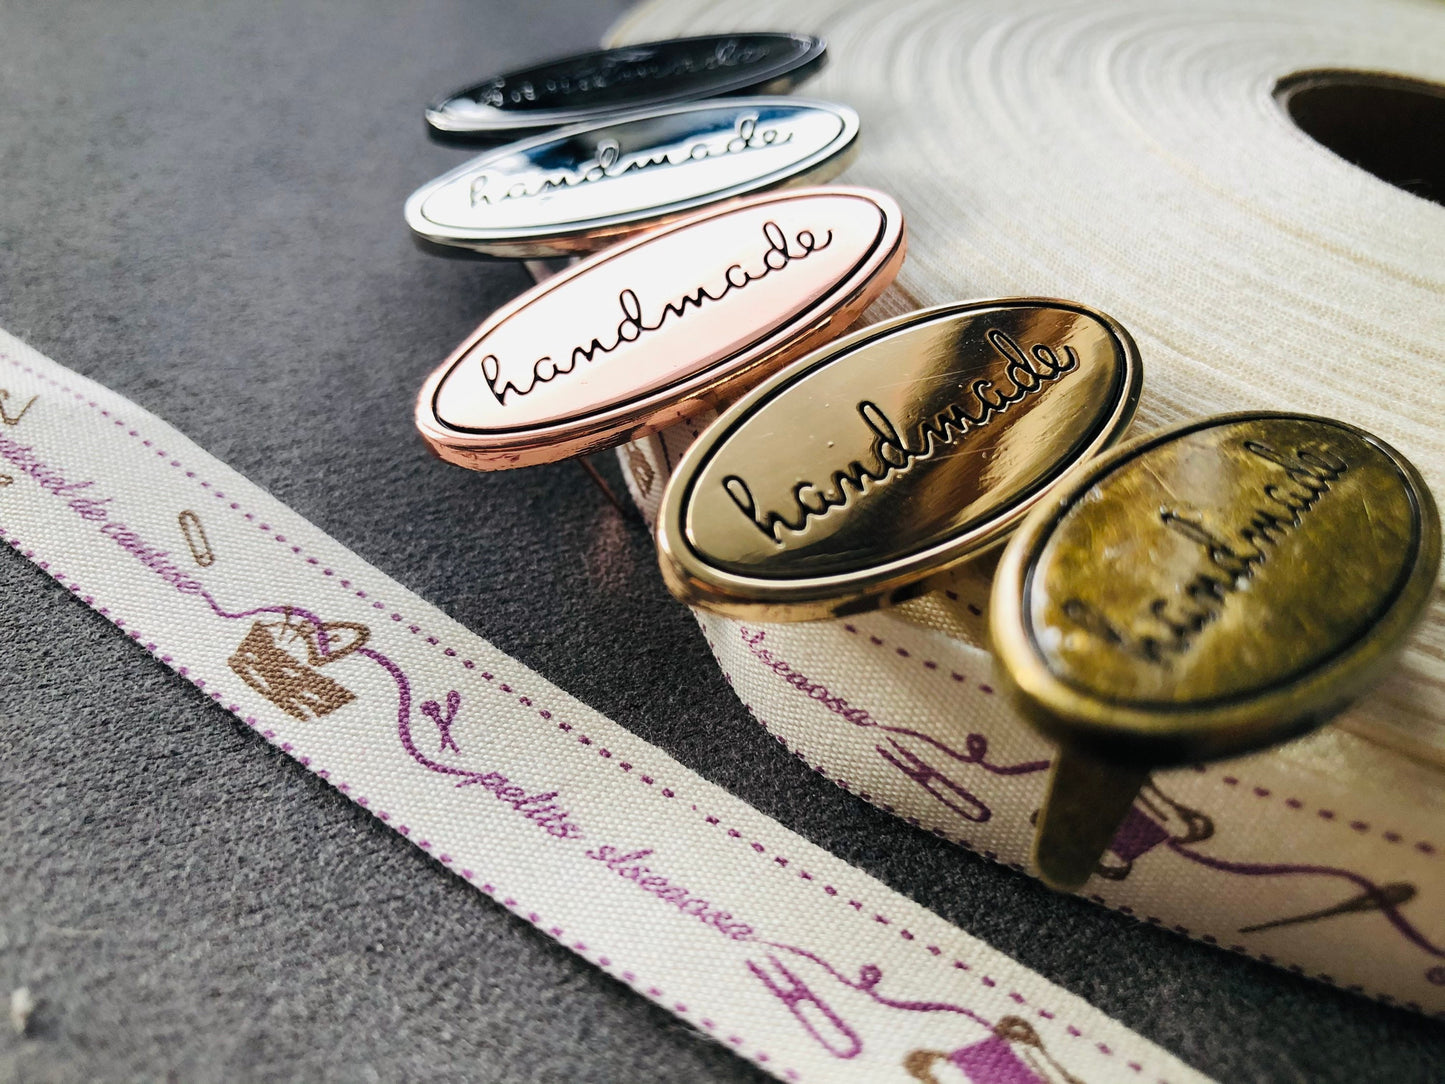 Oval metal handmade labels for handmade bags, clothes, leather, knitting, crochet and craft projects